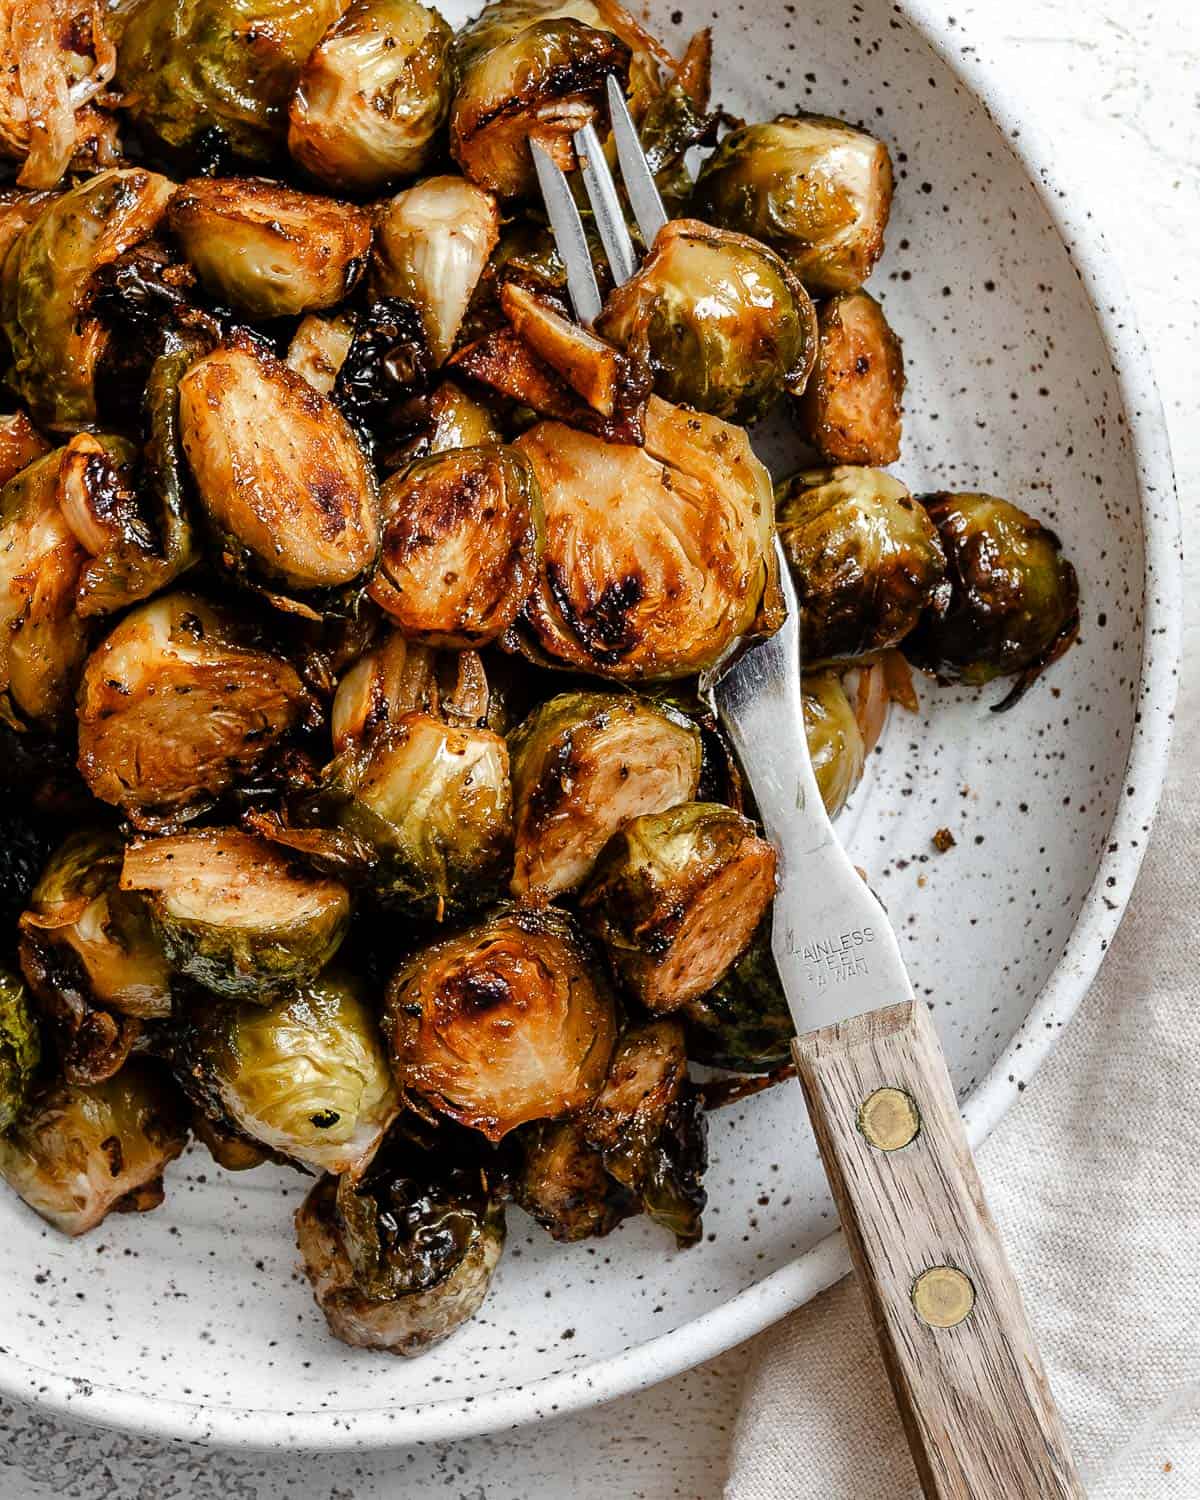 completed brussels sprouts on a plate